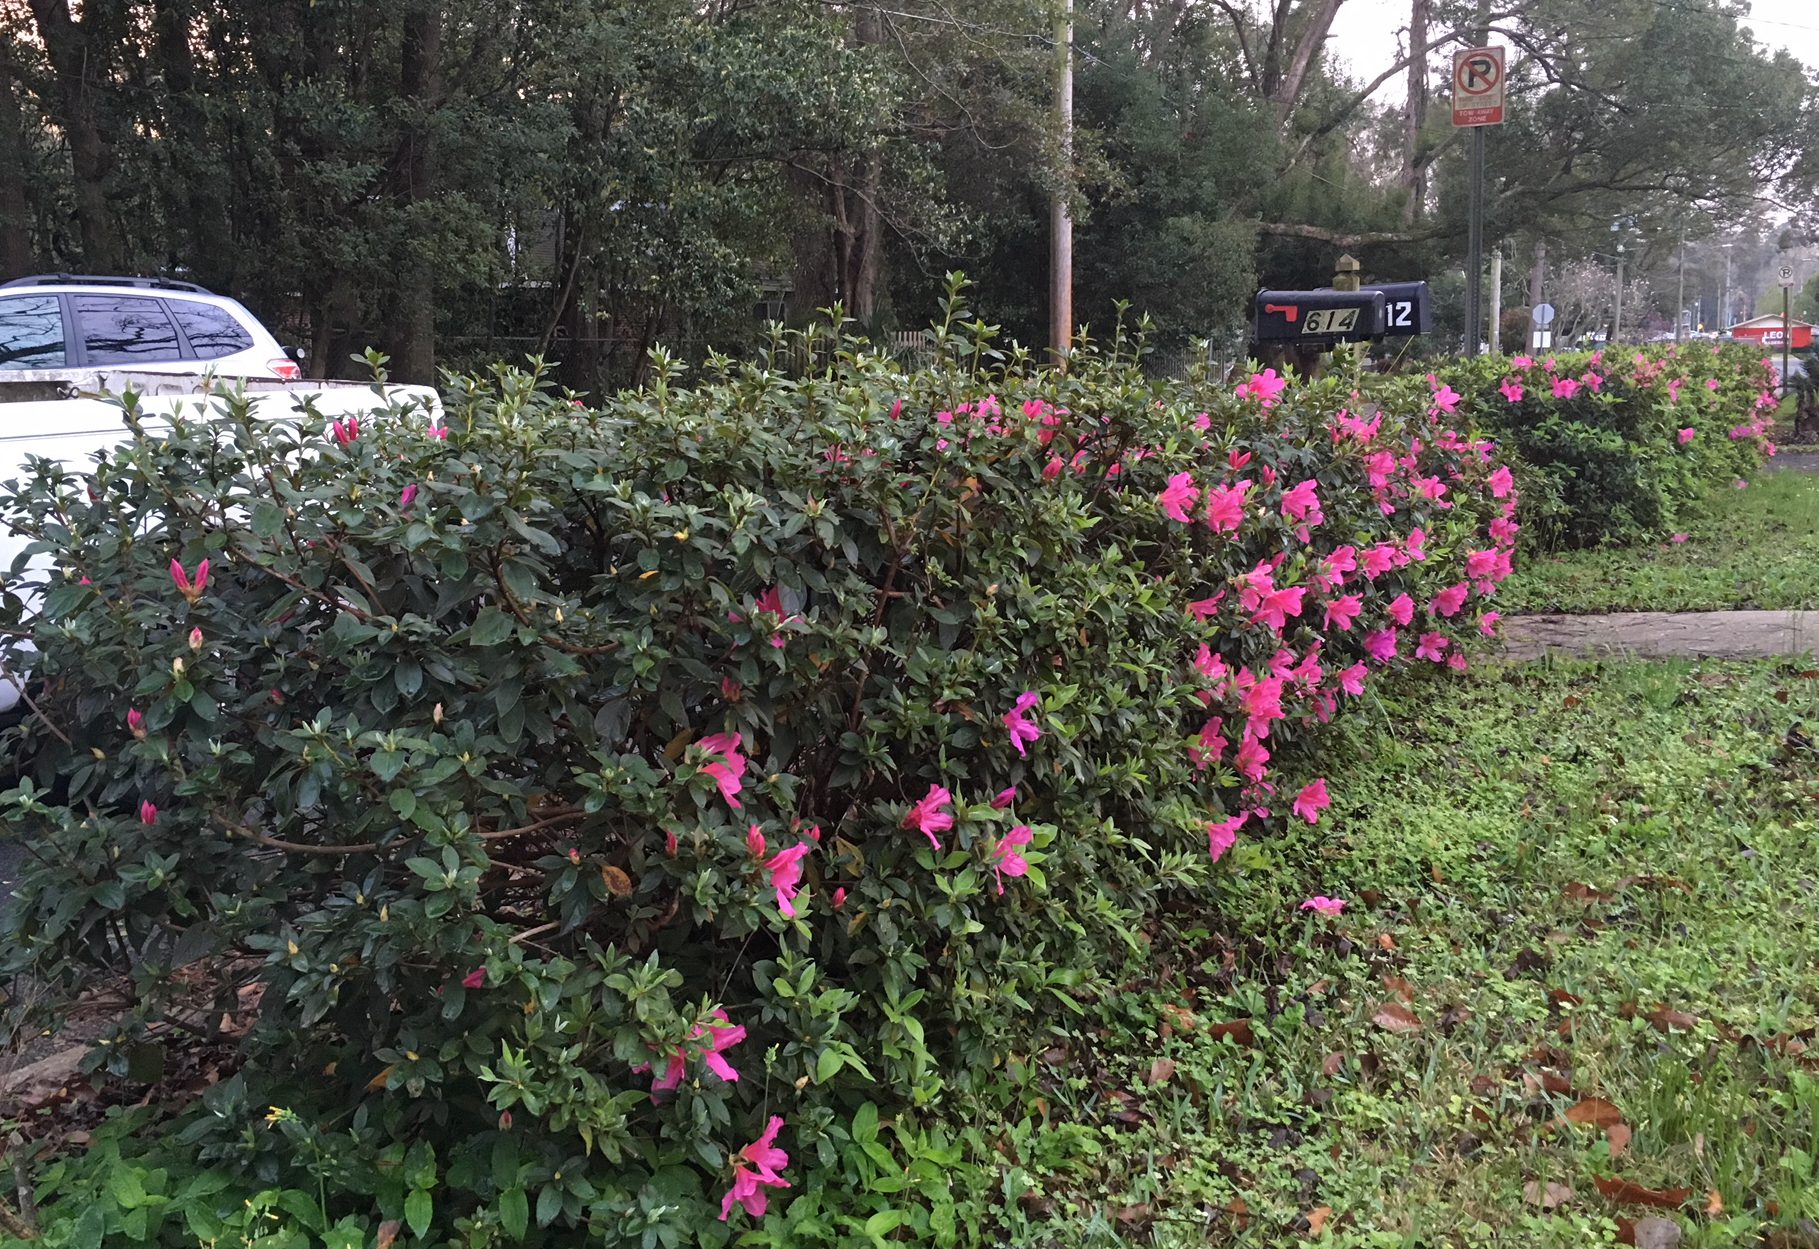 Bushes, year Quincy FL what time of trim to azalea